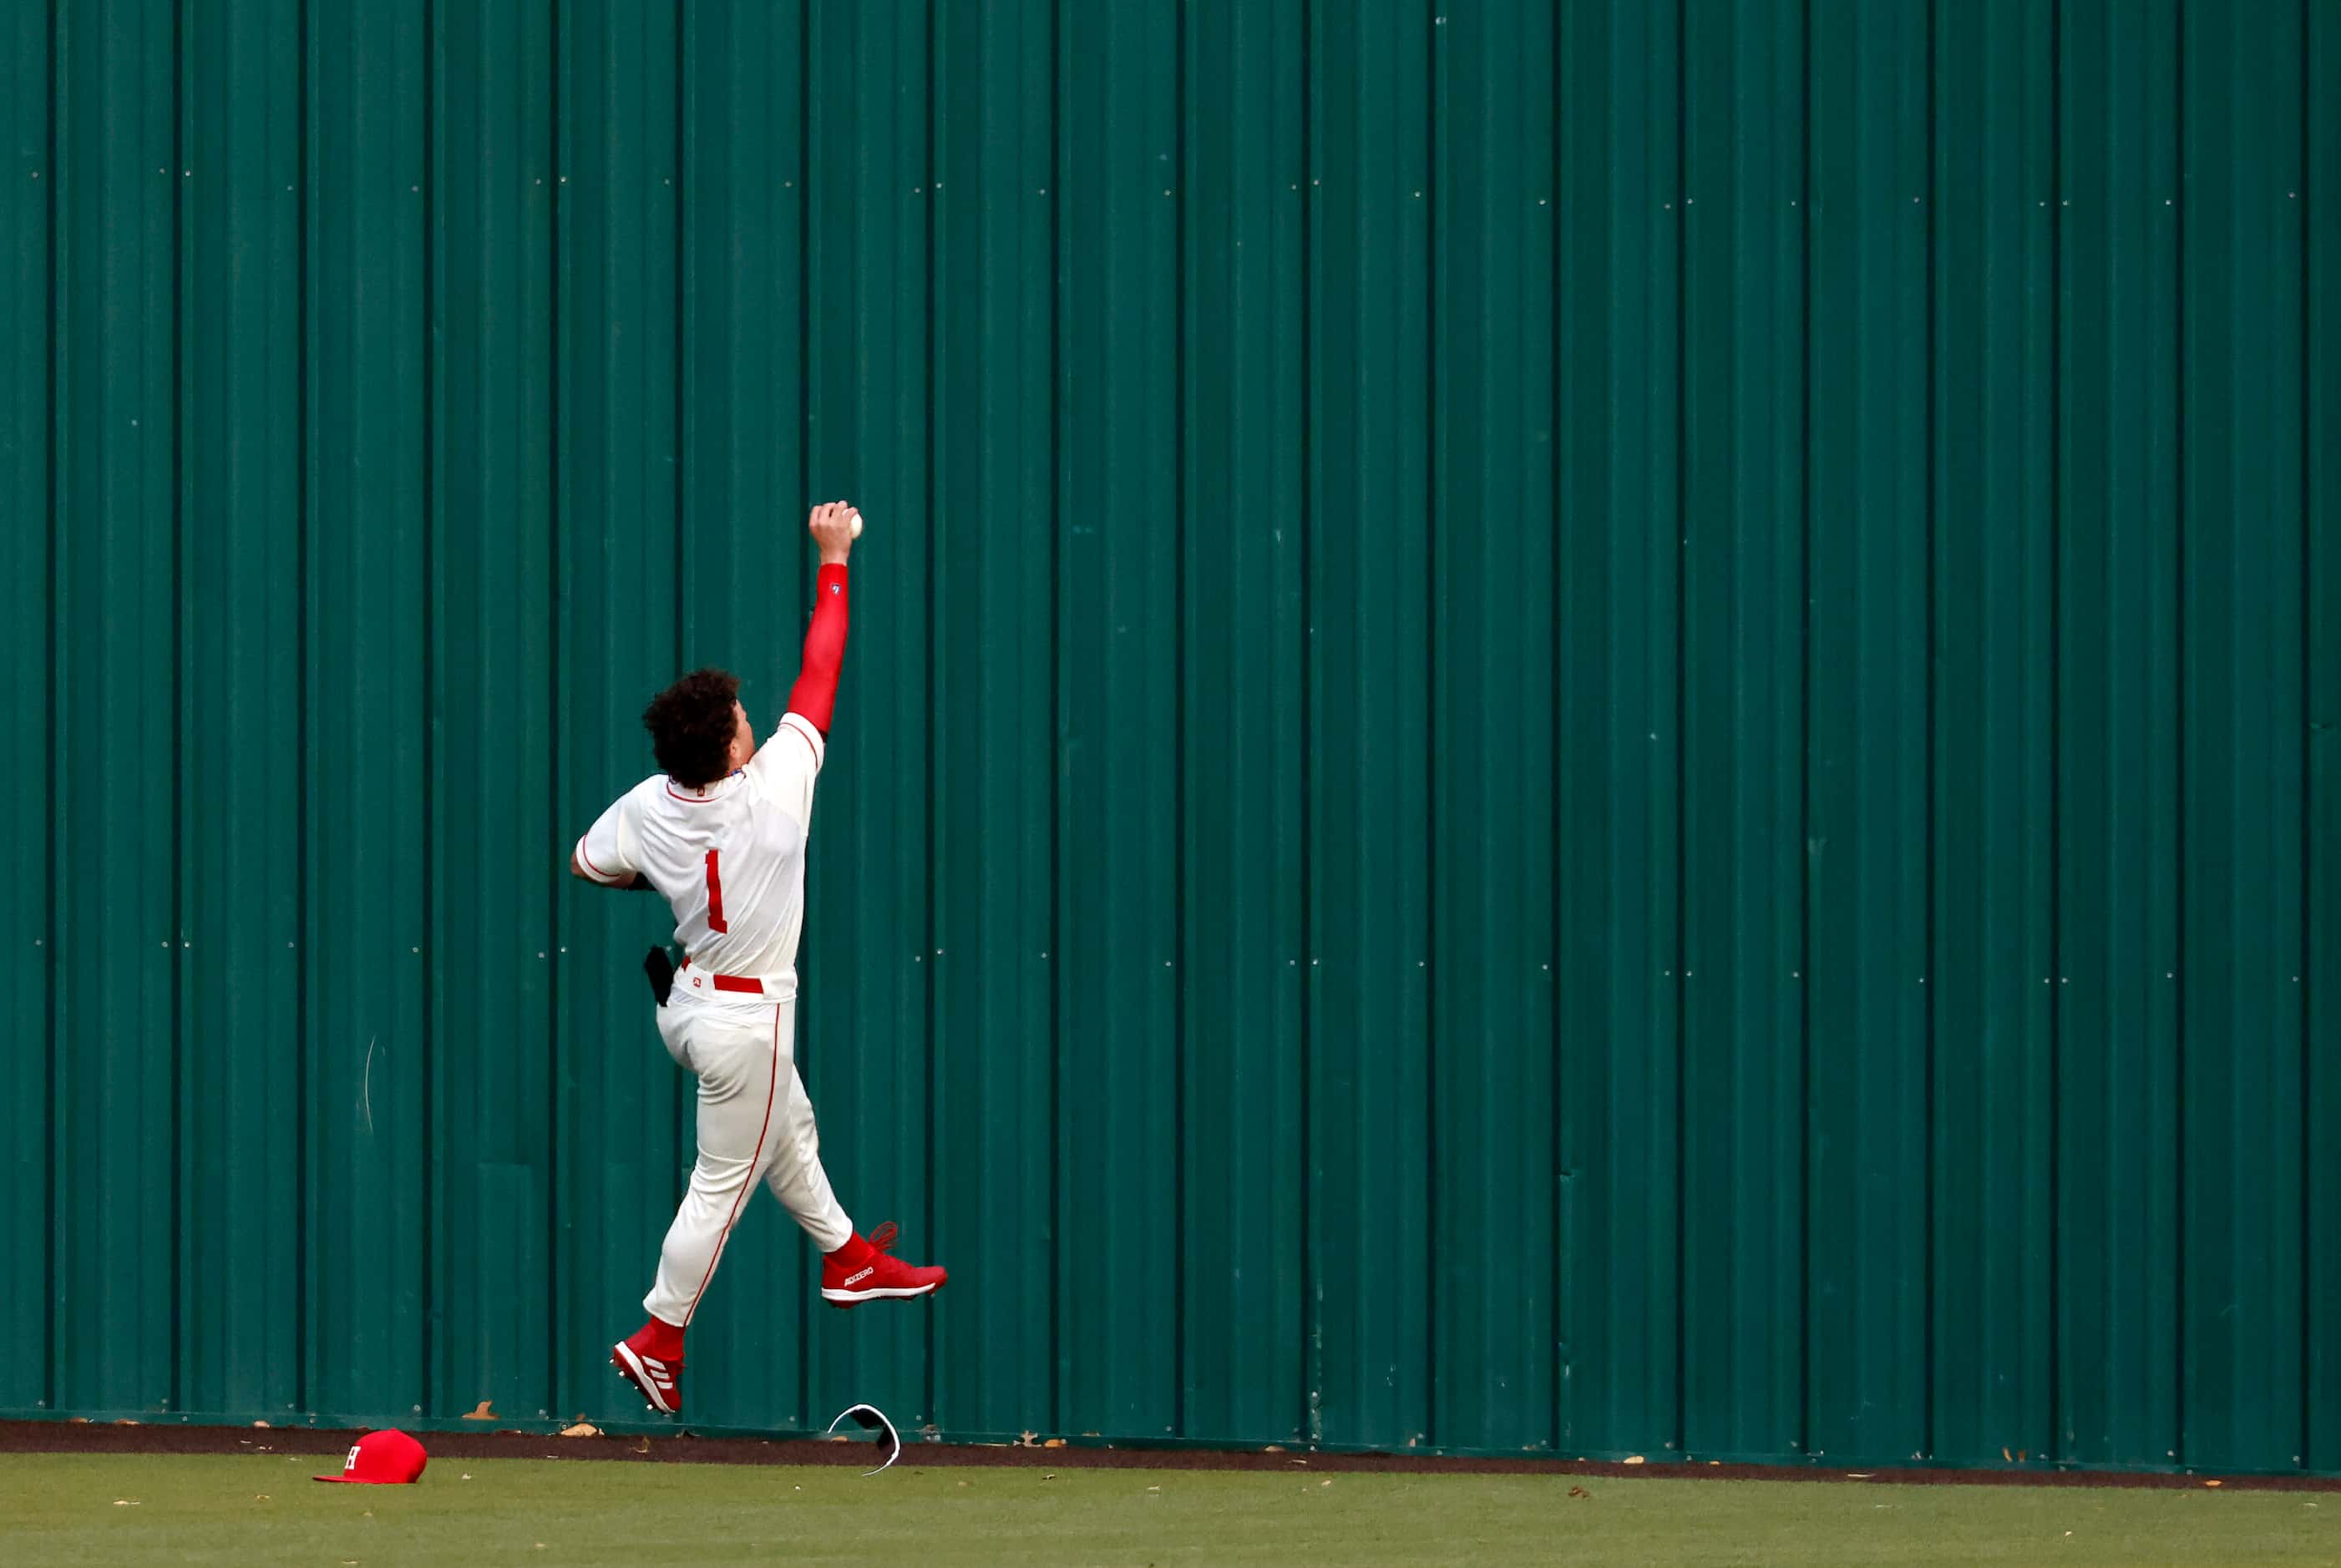 Rockwall-Heath High centerfielder makes a one-handed catch off the wall before throwing it...